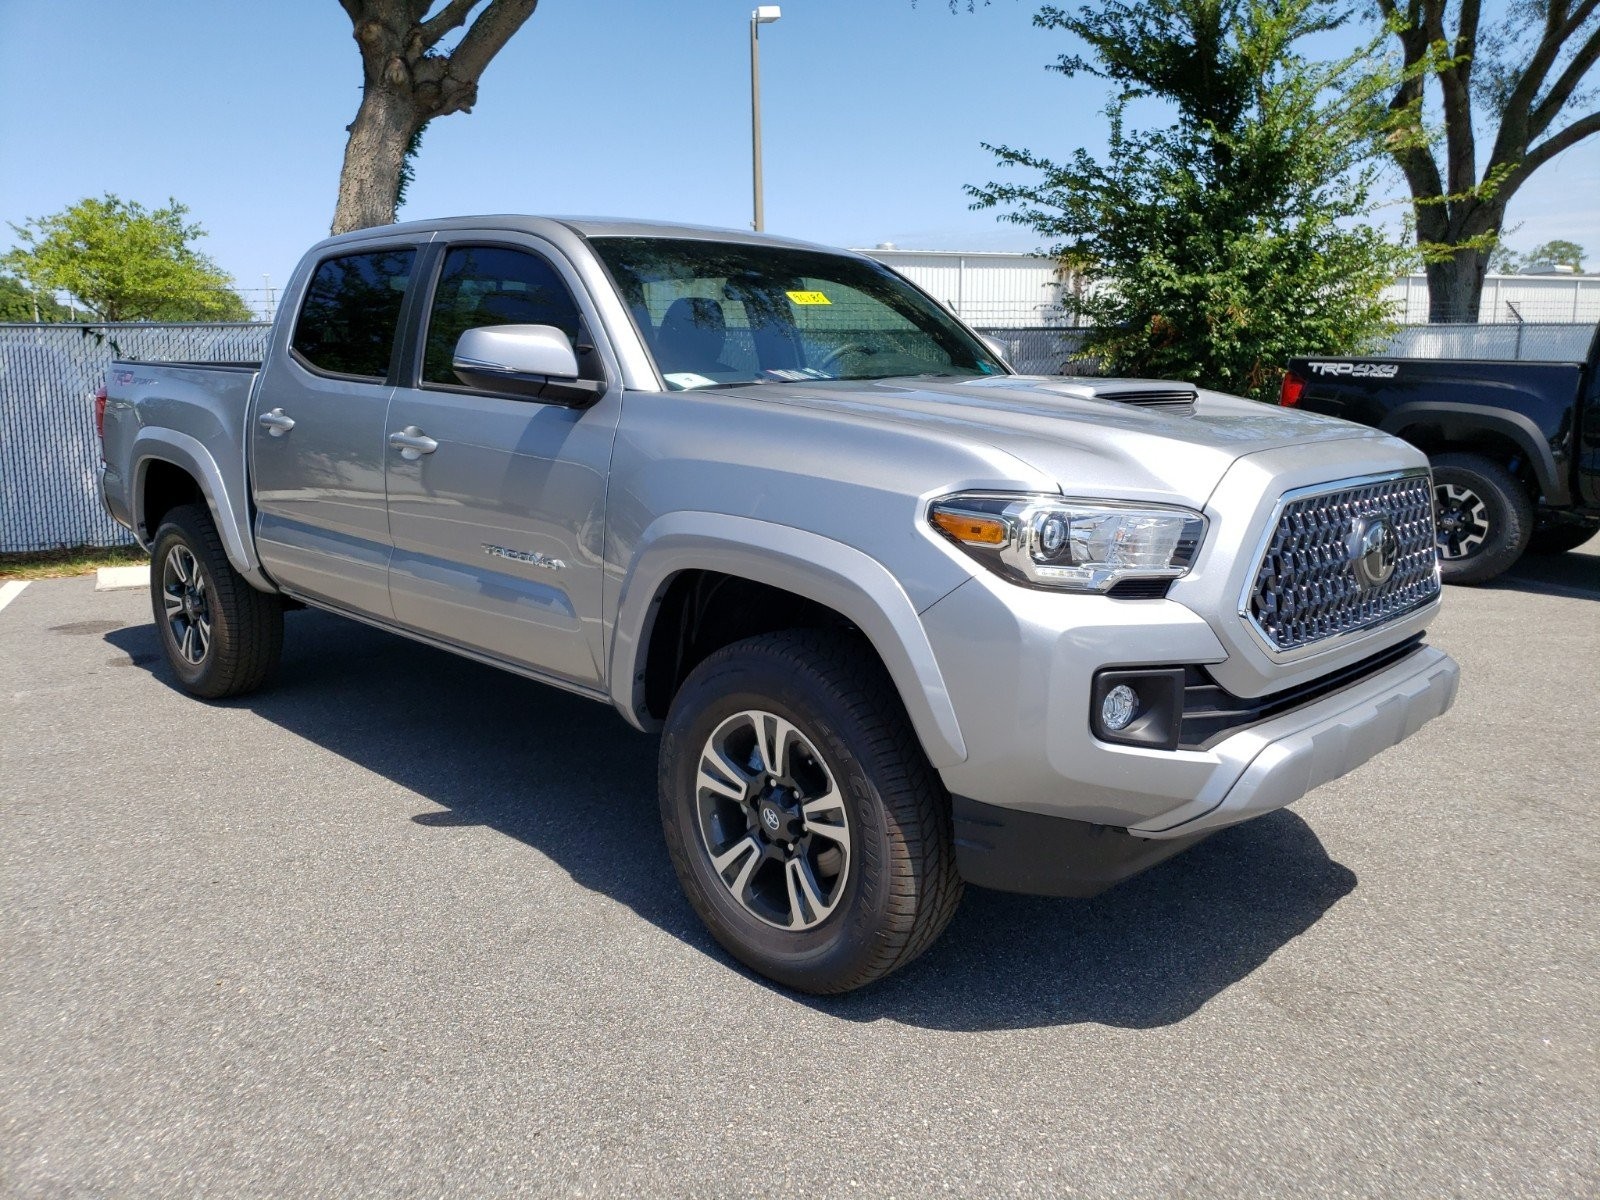 2006 toyota Tacoma Parts Diagram New 2019 toyota Ta A Trd Sport Double Cab In Jacksonville Of 2006 toyota Tacoma Parts Diagram